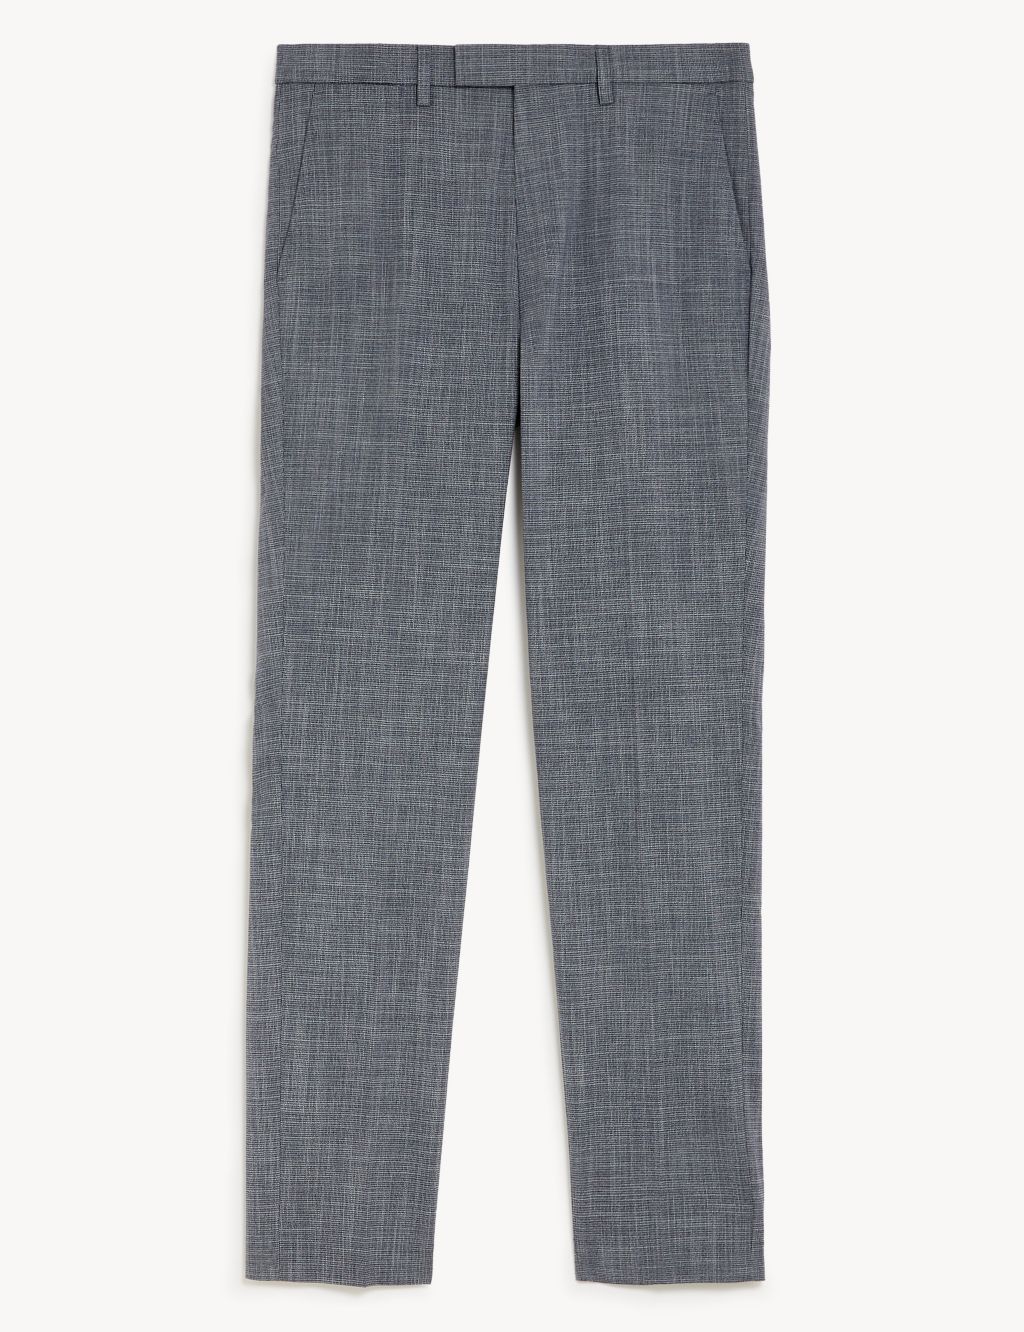 Textured Stretch Trousers image 6